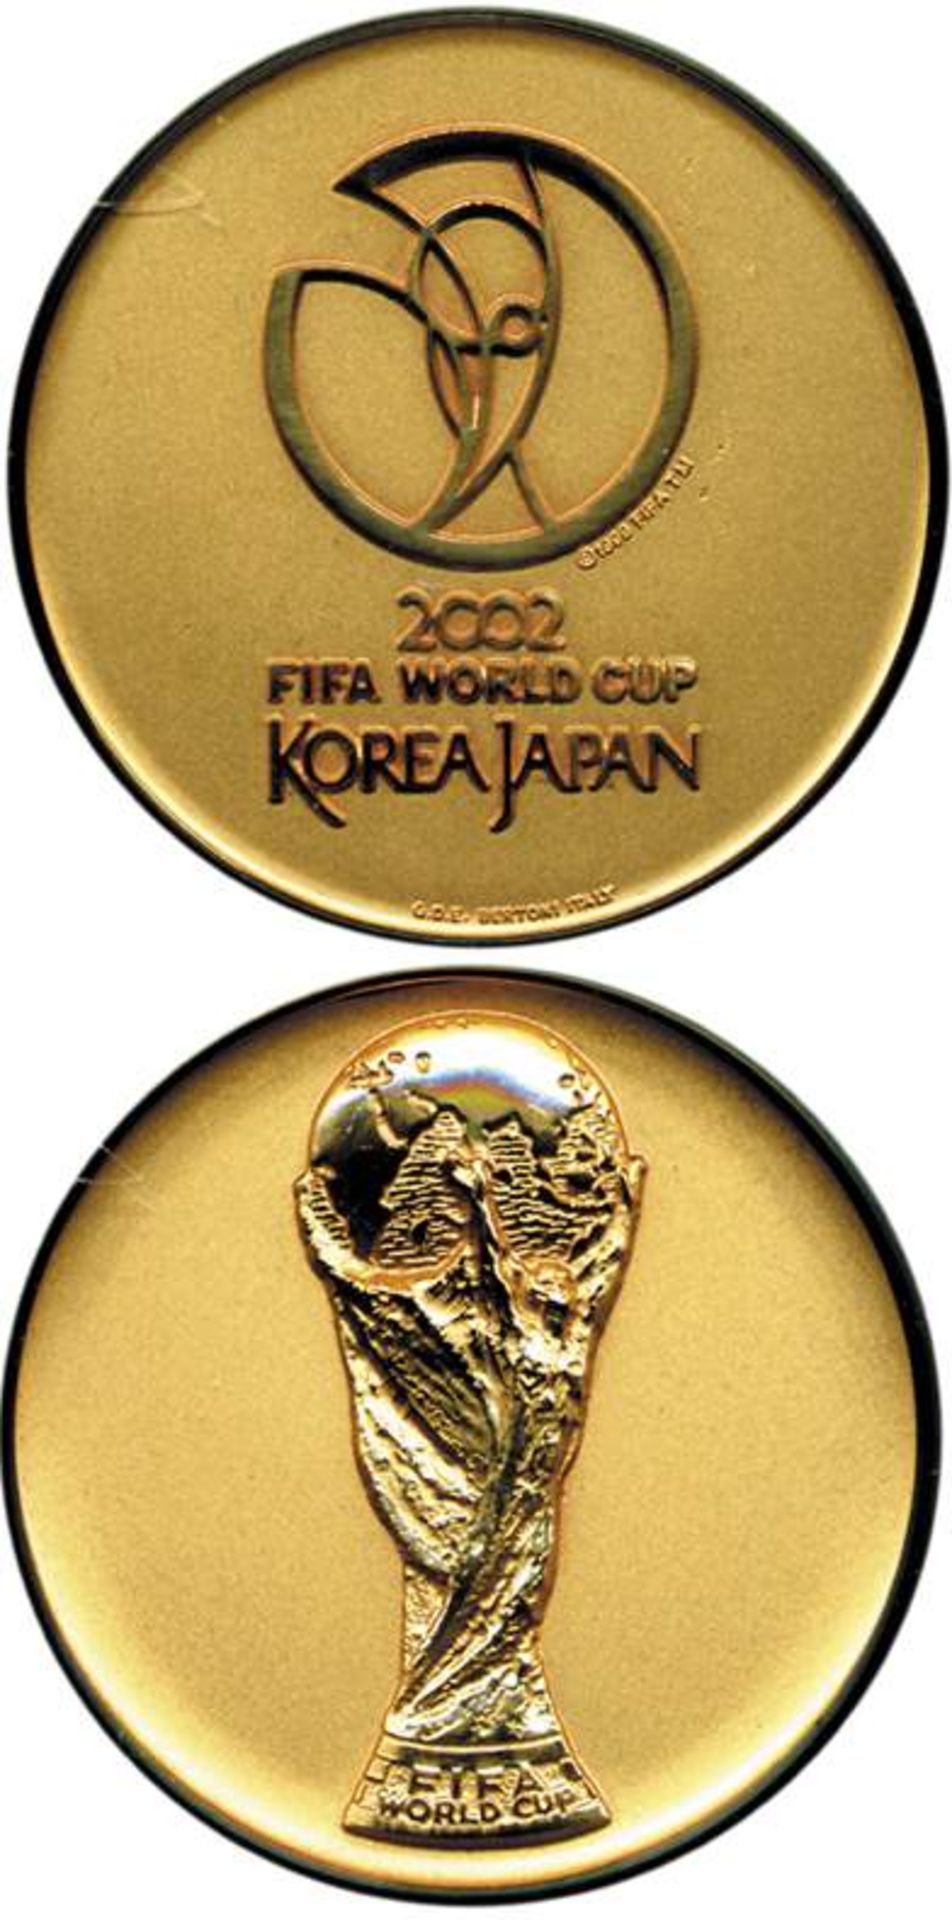 World Cup 2002. Participation medal for Players - World Cup 2002. Participation medal Cup "2002 FIFA